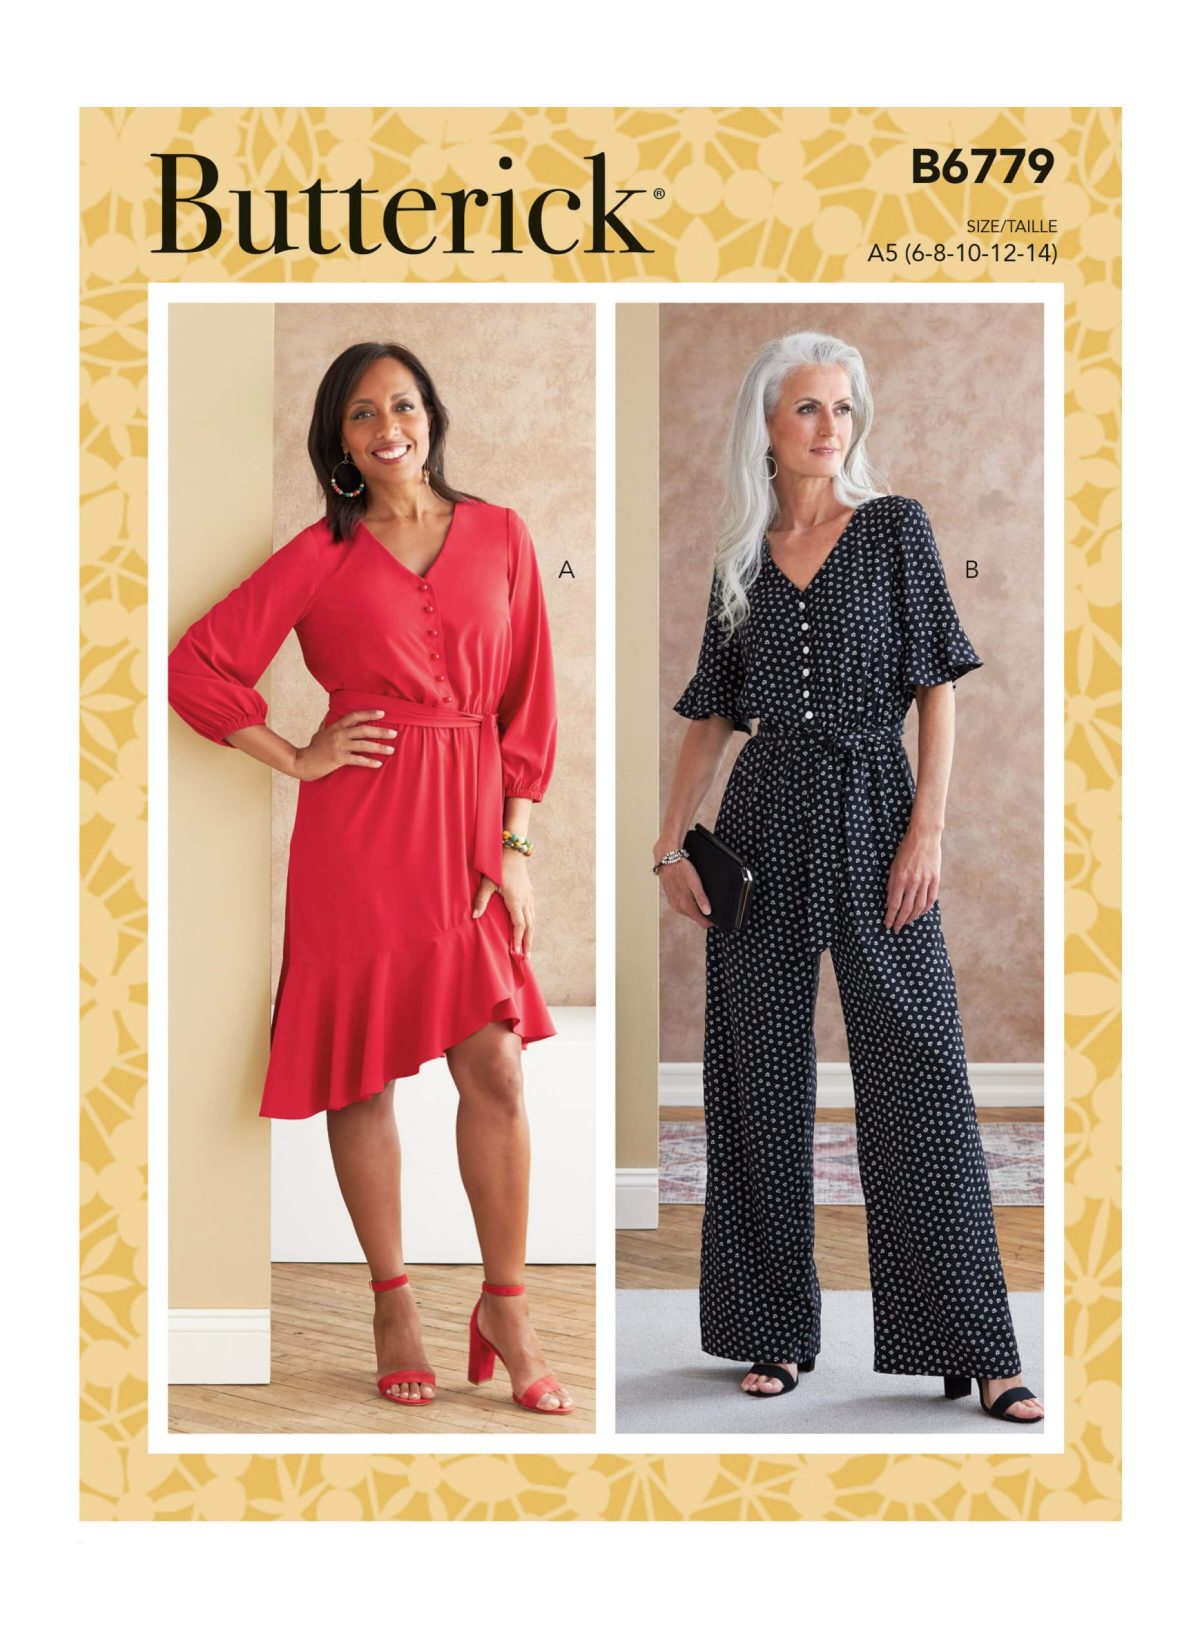 Butterick Sewing Pattern B6779 Misses' Dress, Jumpsuit and Sash